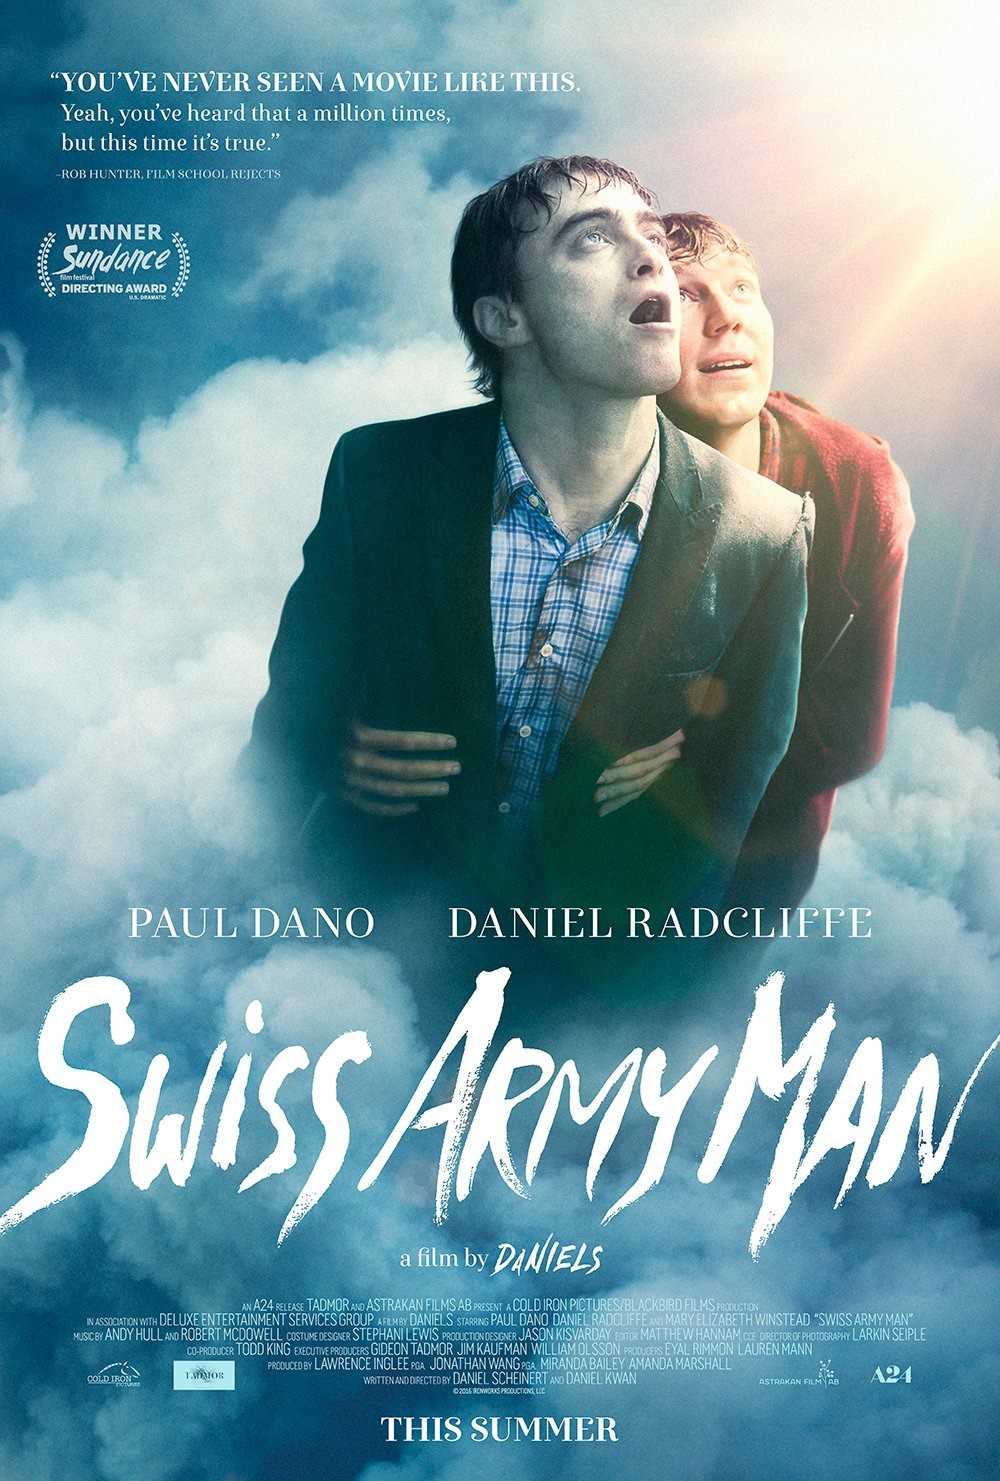 Poster of A24's Swiss Army Man (2016)